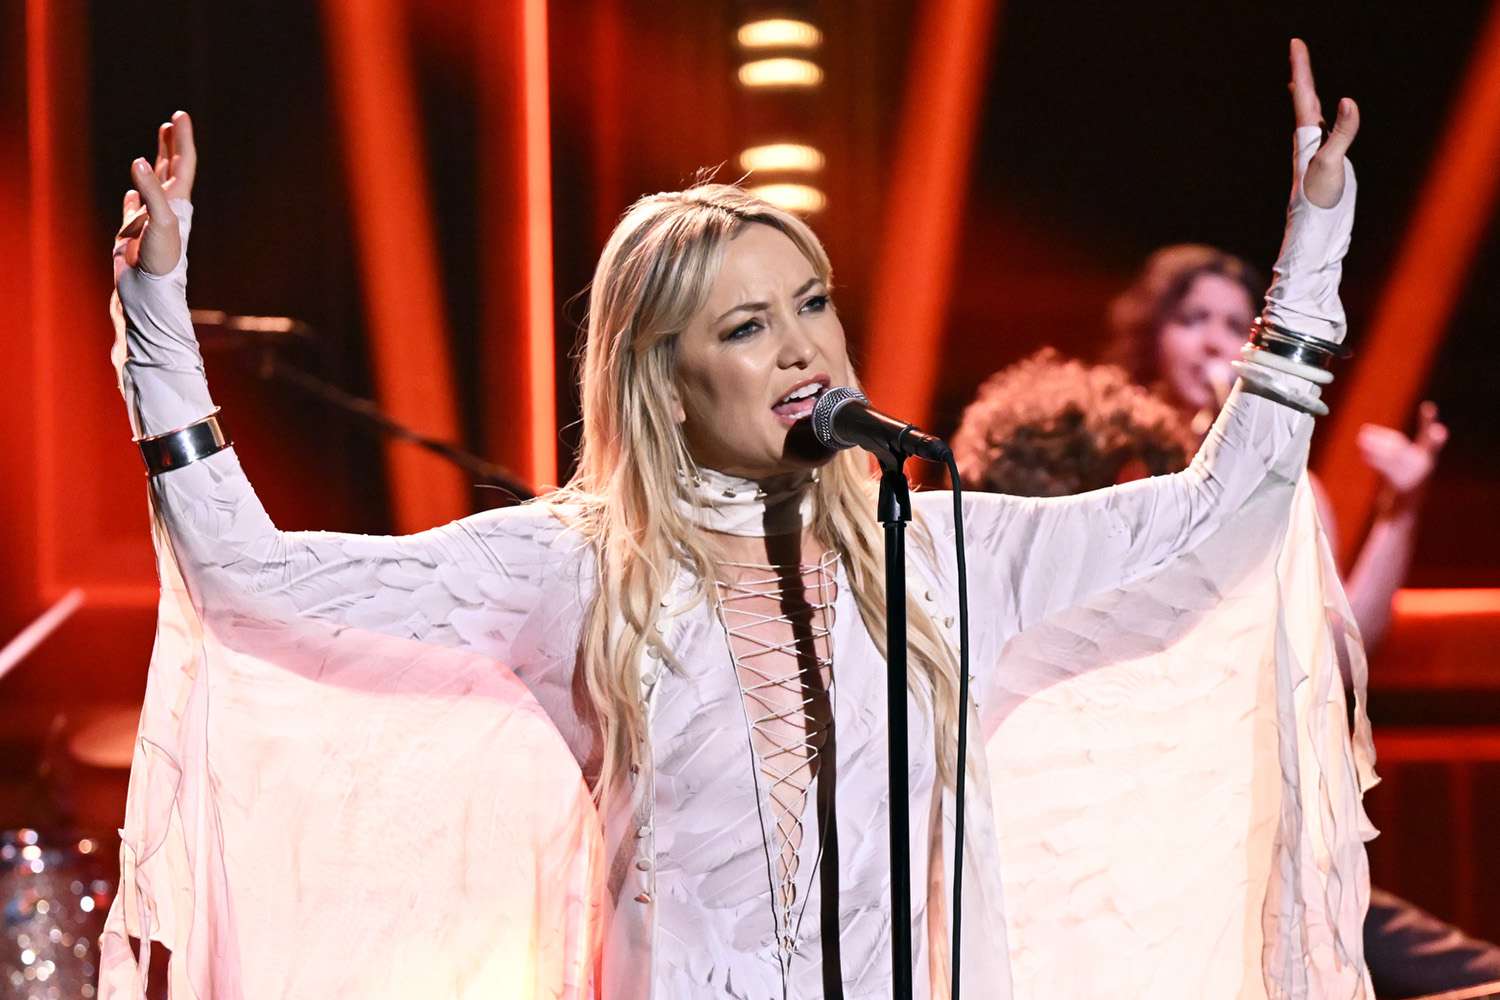 Kate Hudson Makes TV Performance Debut with Song 'Gonna Find Out,' Teases Tour: 'I'm Getting Back on the Bus!'